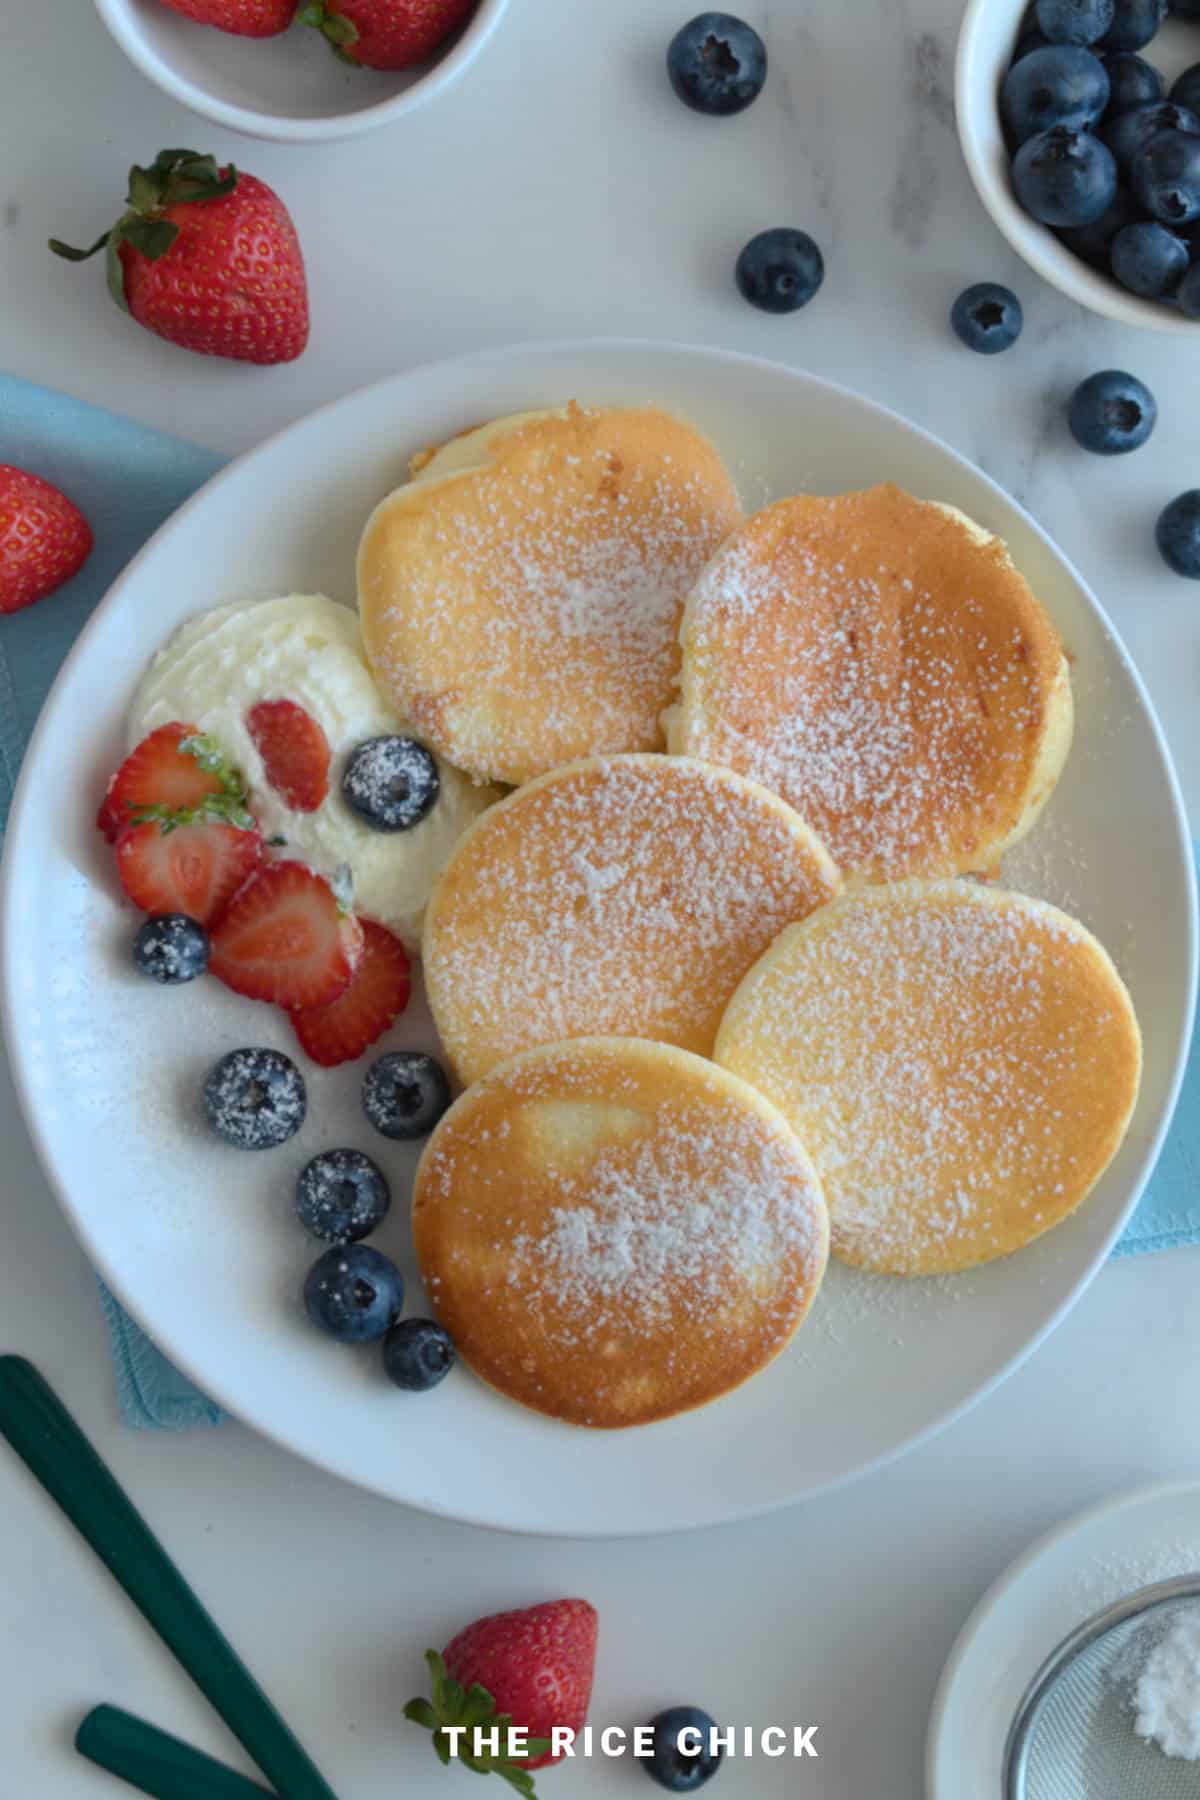 A plate of rice flour pancakes with blueberries, whipped cream, and strawberries.